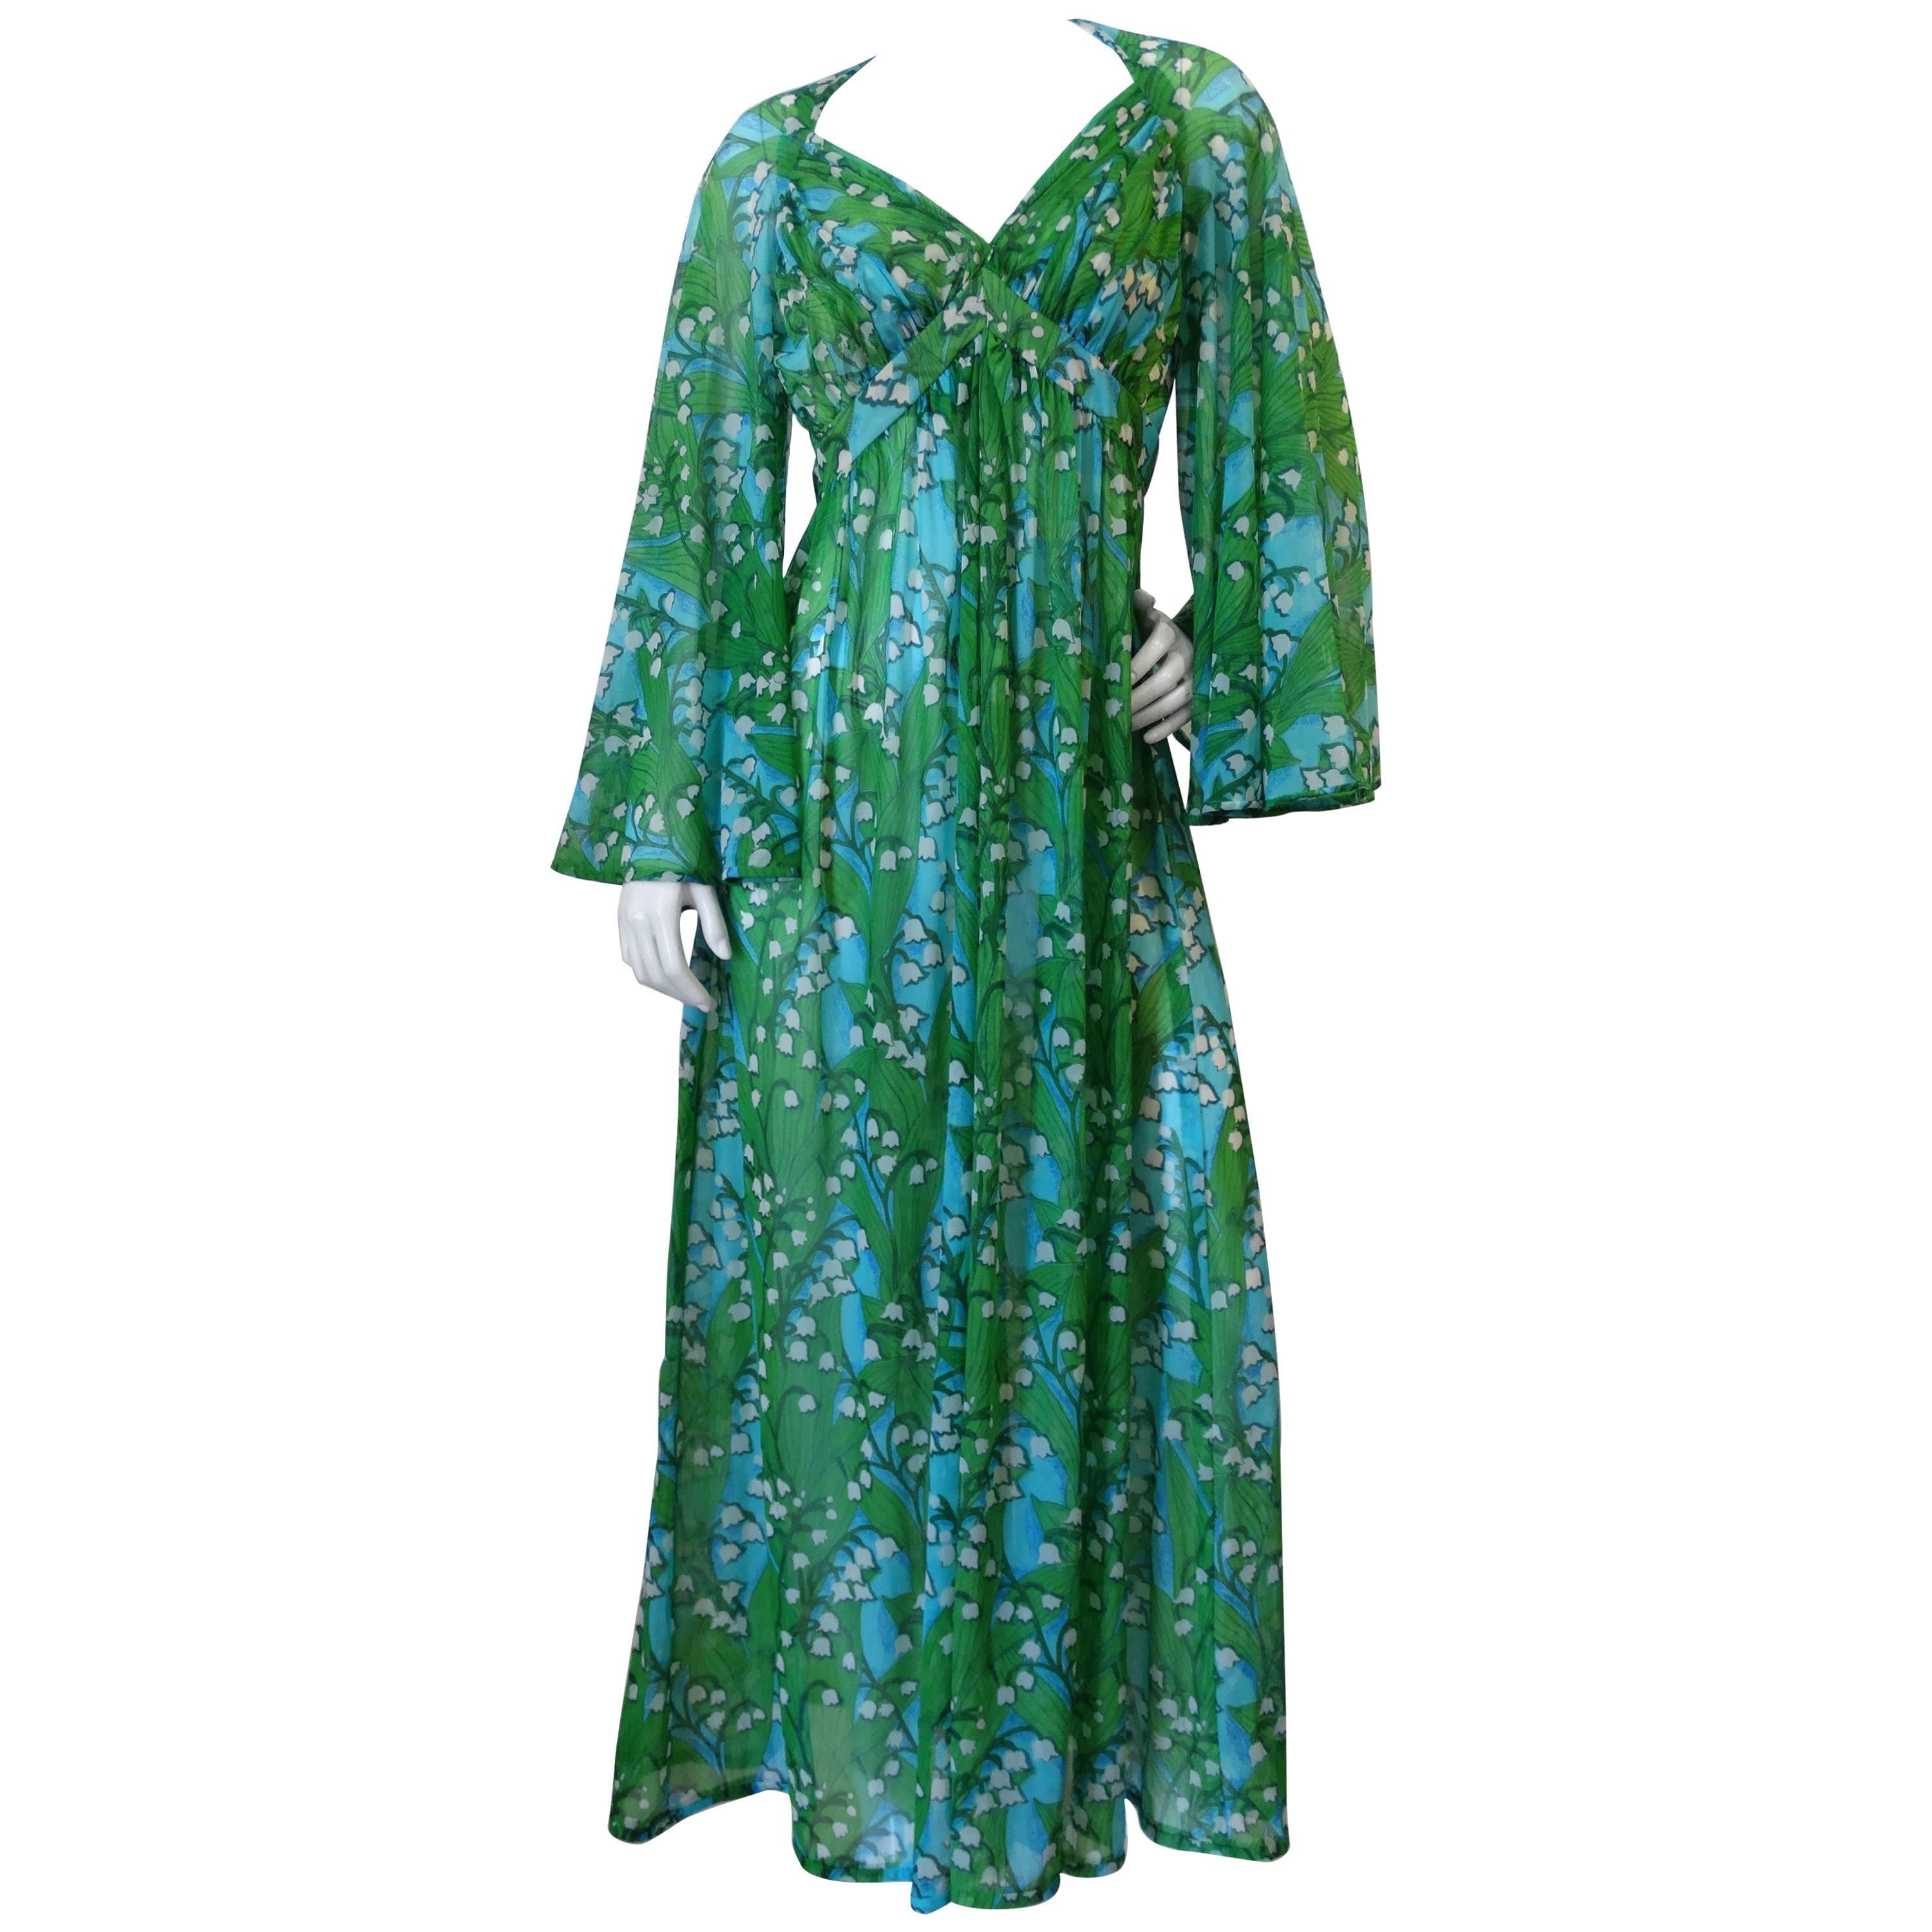 1970s Robert David Morton" Lily of the Valley" Sheer Dress with Bell Sleeves